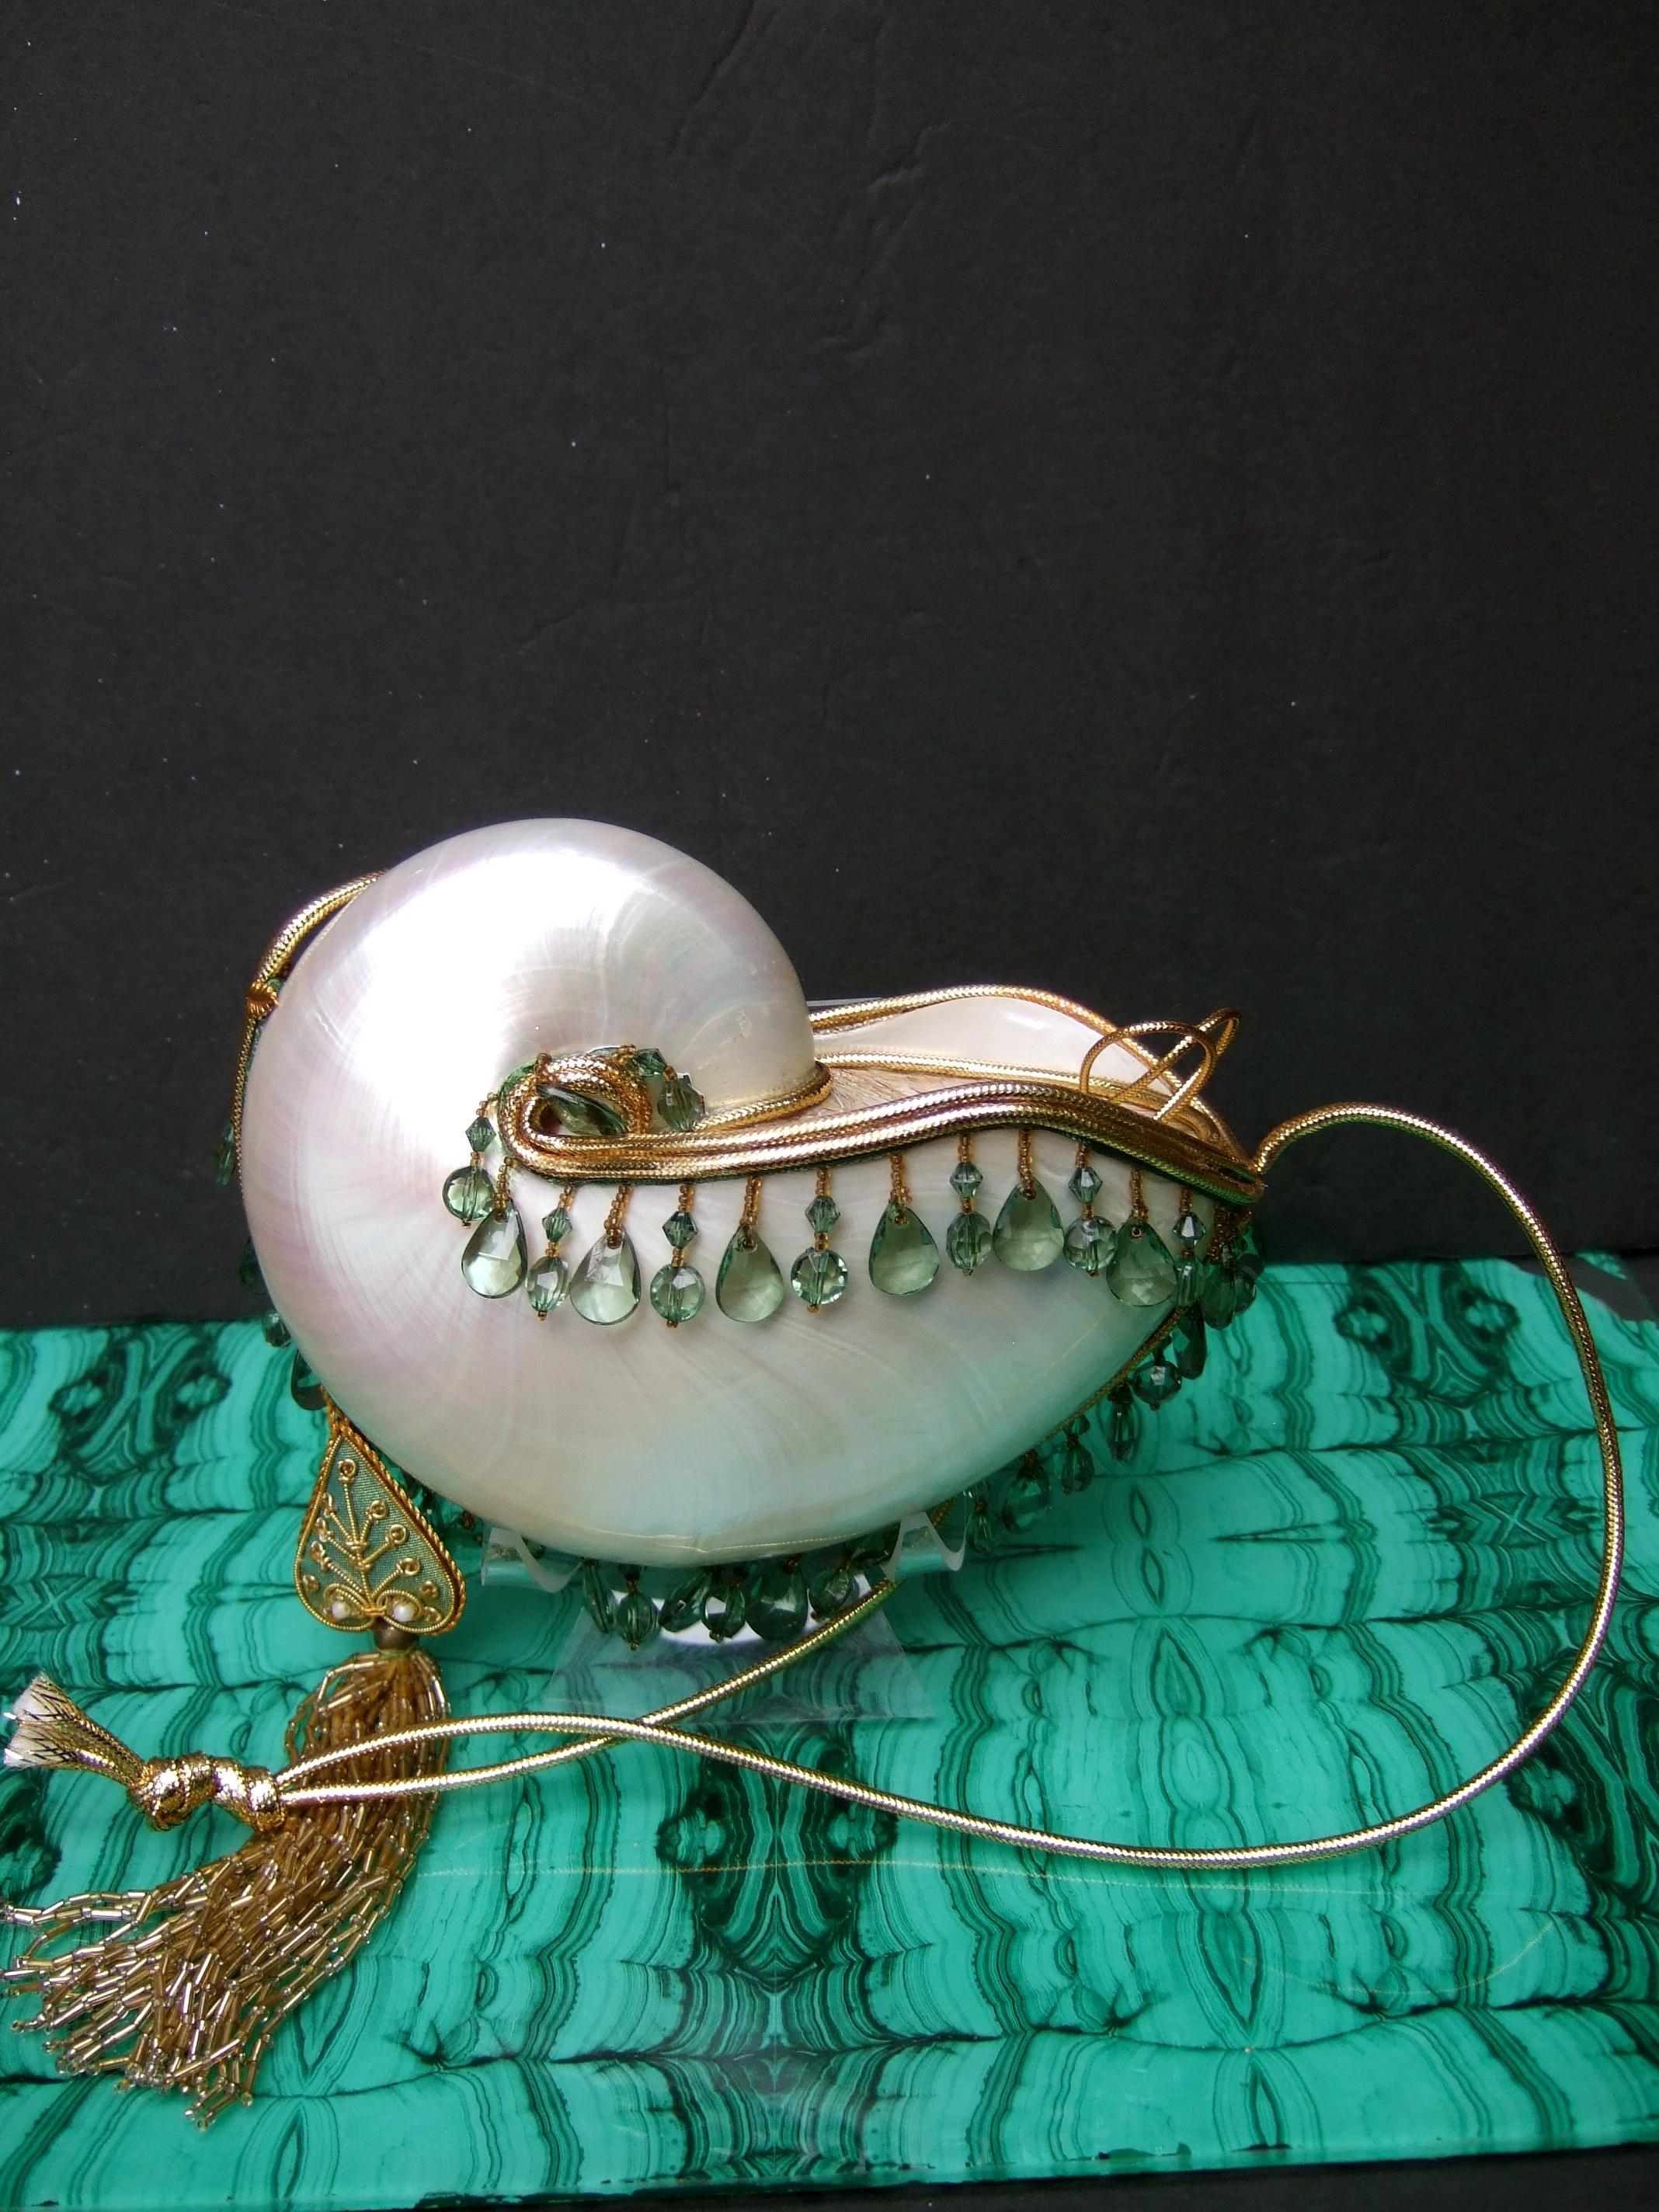 Opulent artisan chamber nautilus jeweled shell evening bag c 1970s
The elegant evening bag is designed with an organic large chamber nautilus sea shell
The shell has a luminous glowing patina

The exotic sea shell is embellished with gold metallic